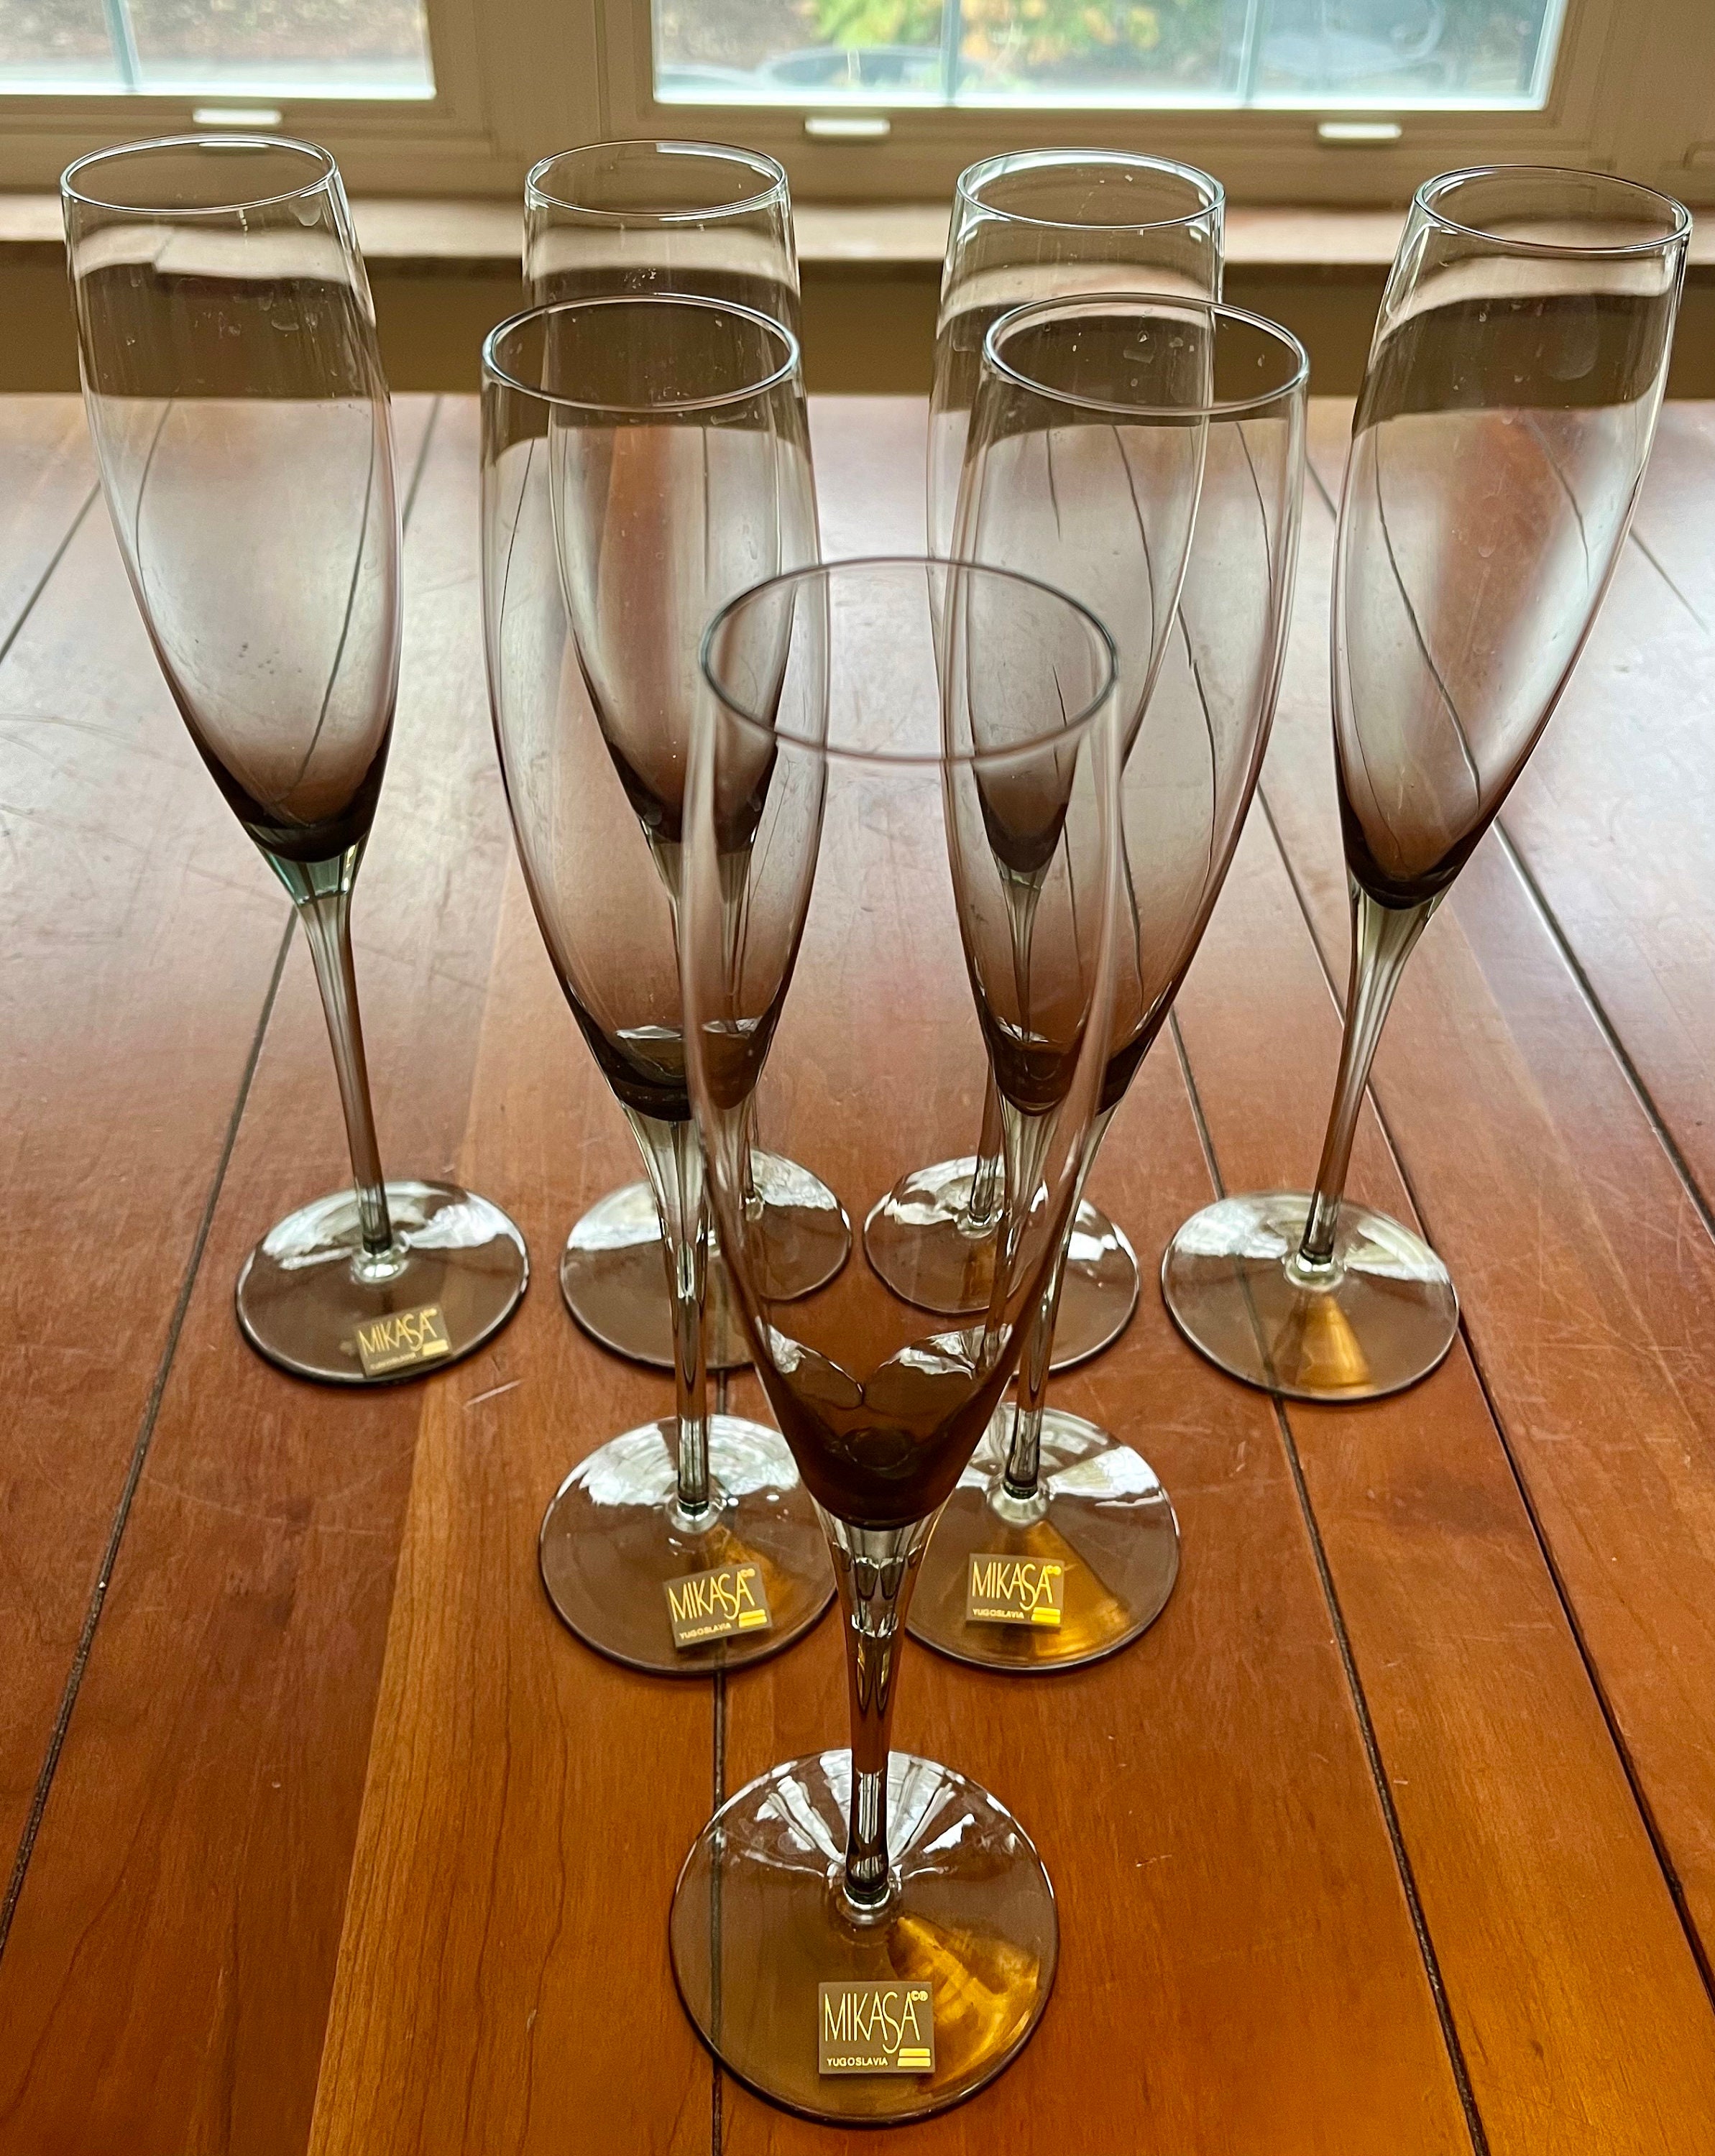 Mikasa Champagne Flutes – With A Past